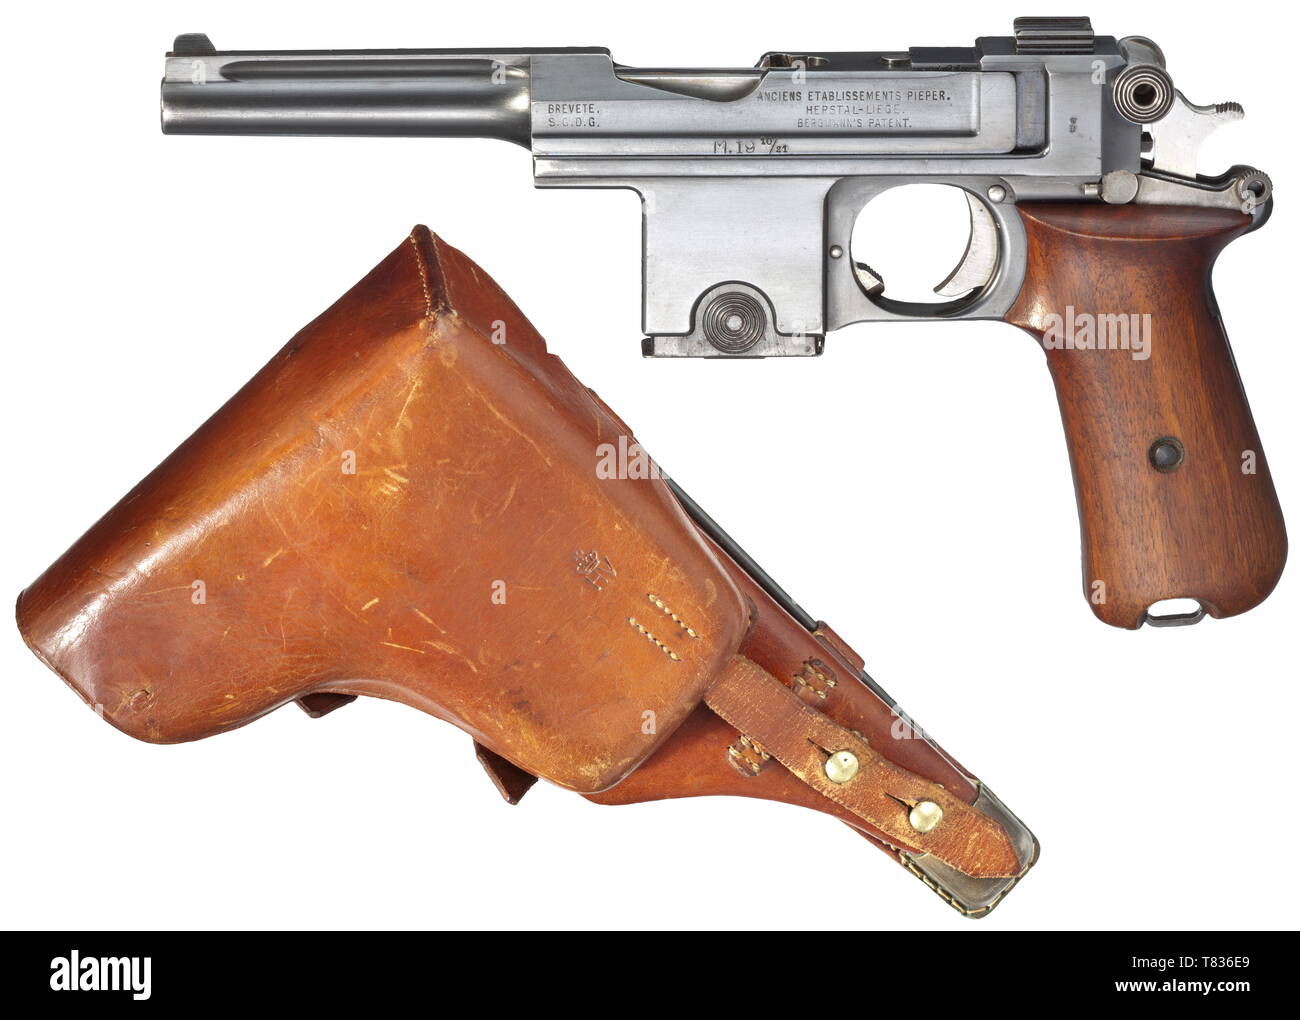 A Bergmann mod. 1910/21, with holster Cal. 9 mm Bergmann, no. 5428. Matching numbers. Mirror-like bore. Produced by Pieper, Herstal. On barrel housing, below logo, signed 'M.1910/21', inventory no. 290, on the right of front sight base acceptance crown/DK/41. This indicates modification to mod. 1910/21 or arsenal overhaul under German occupation (starting in May 1940) in 1941. Complete, original bluing. Small and operational parts polished white. Extractor blued. Matching-numbered, smooth walnut grip panels. Magazine with S/N 8458. Almost mint condition. Comes with a light , Editorial-Use-Only Stock Photo